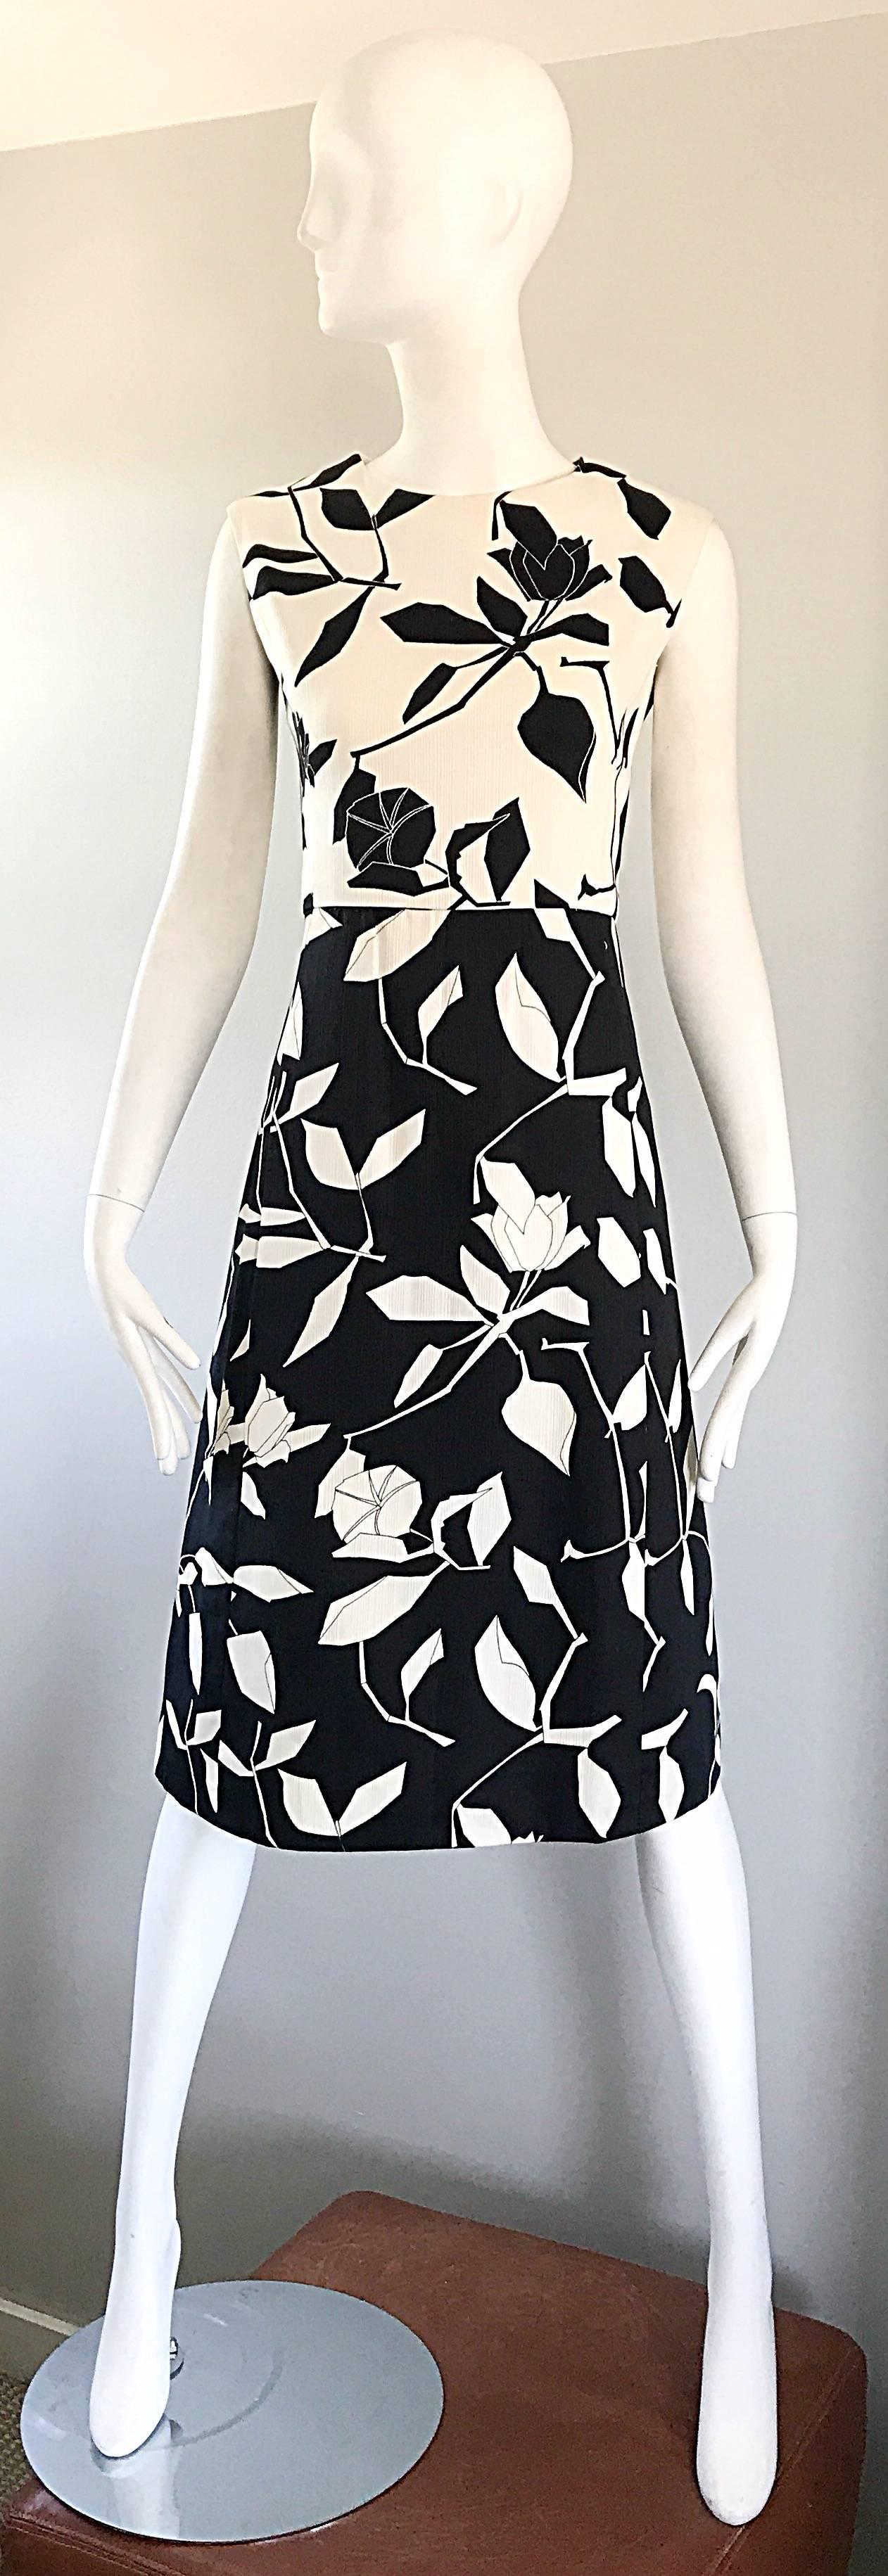 Insanely chic 1960s demi couture black and white abstract flower print A-Line dress! Luxurious cotton and silk fabric. Though no designer label remains, this gem was surely created by a high end designer of the era. Possibly Jeanne Lanvin or Guy